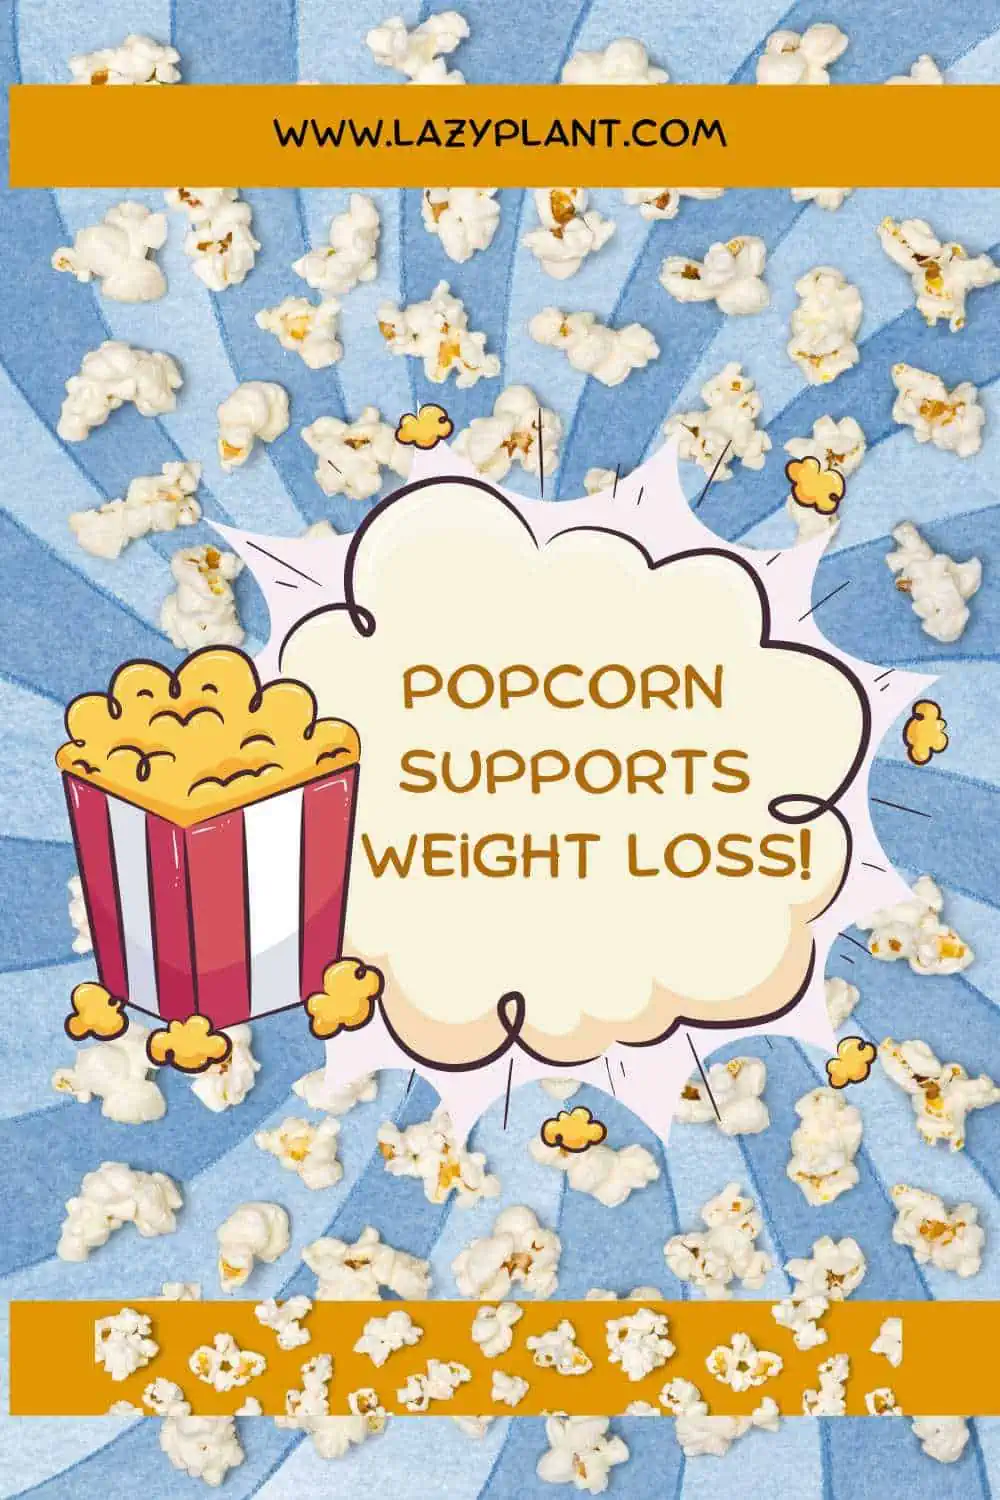 How to cook popcorn for weight loss?